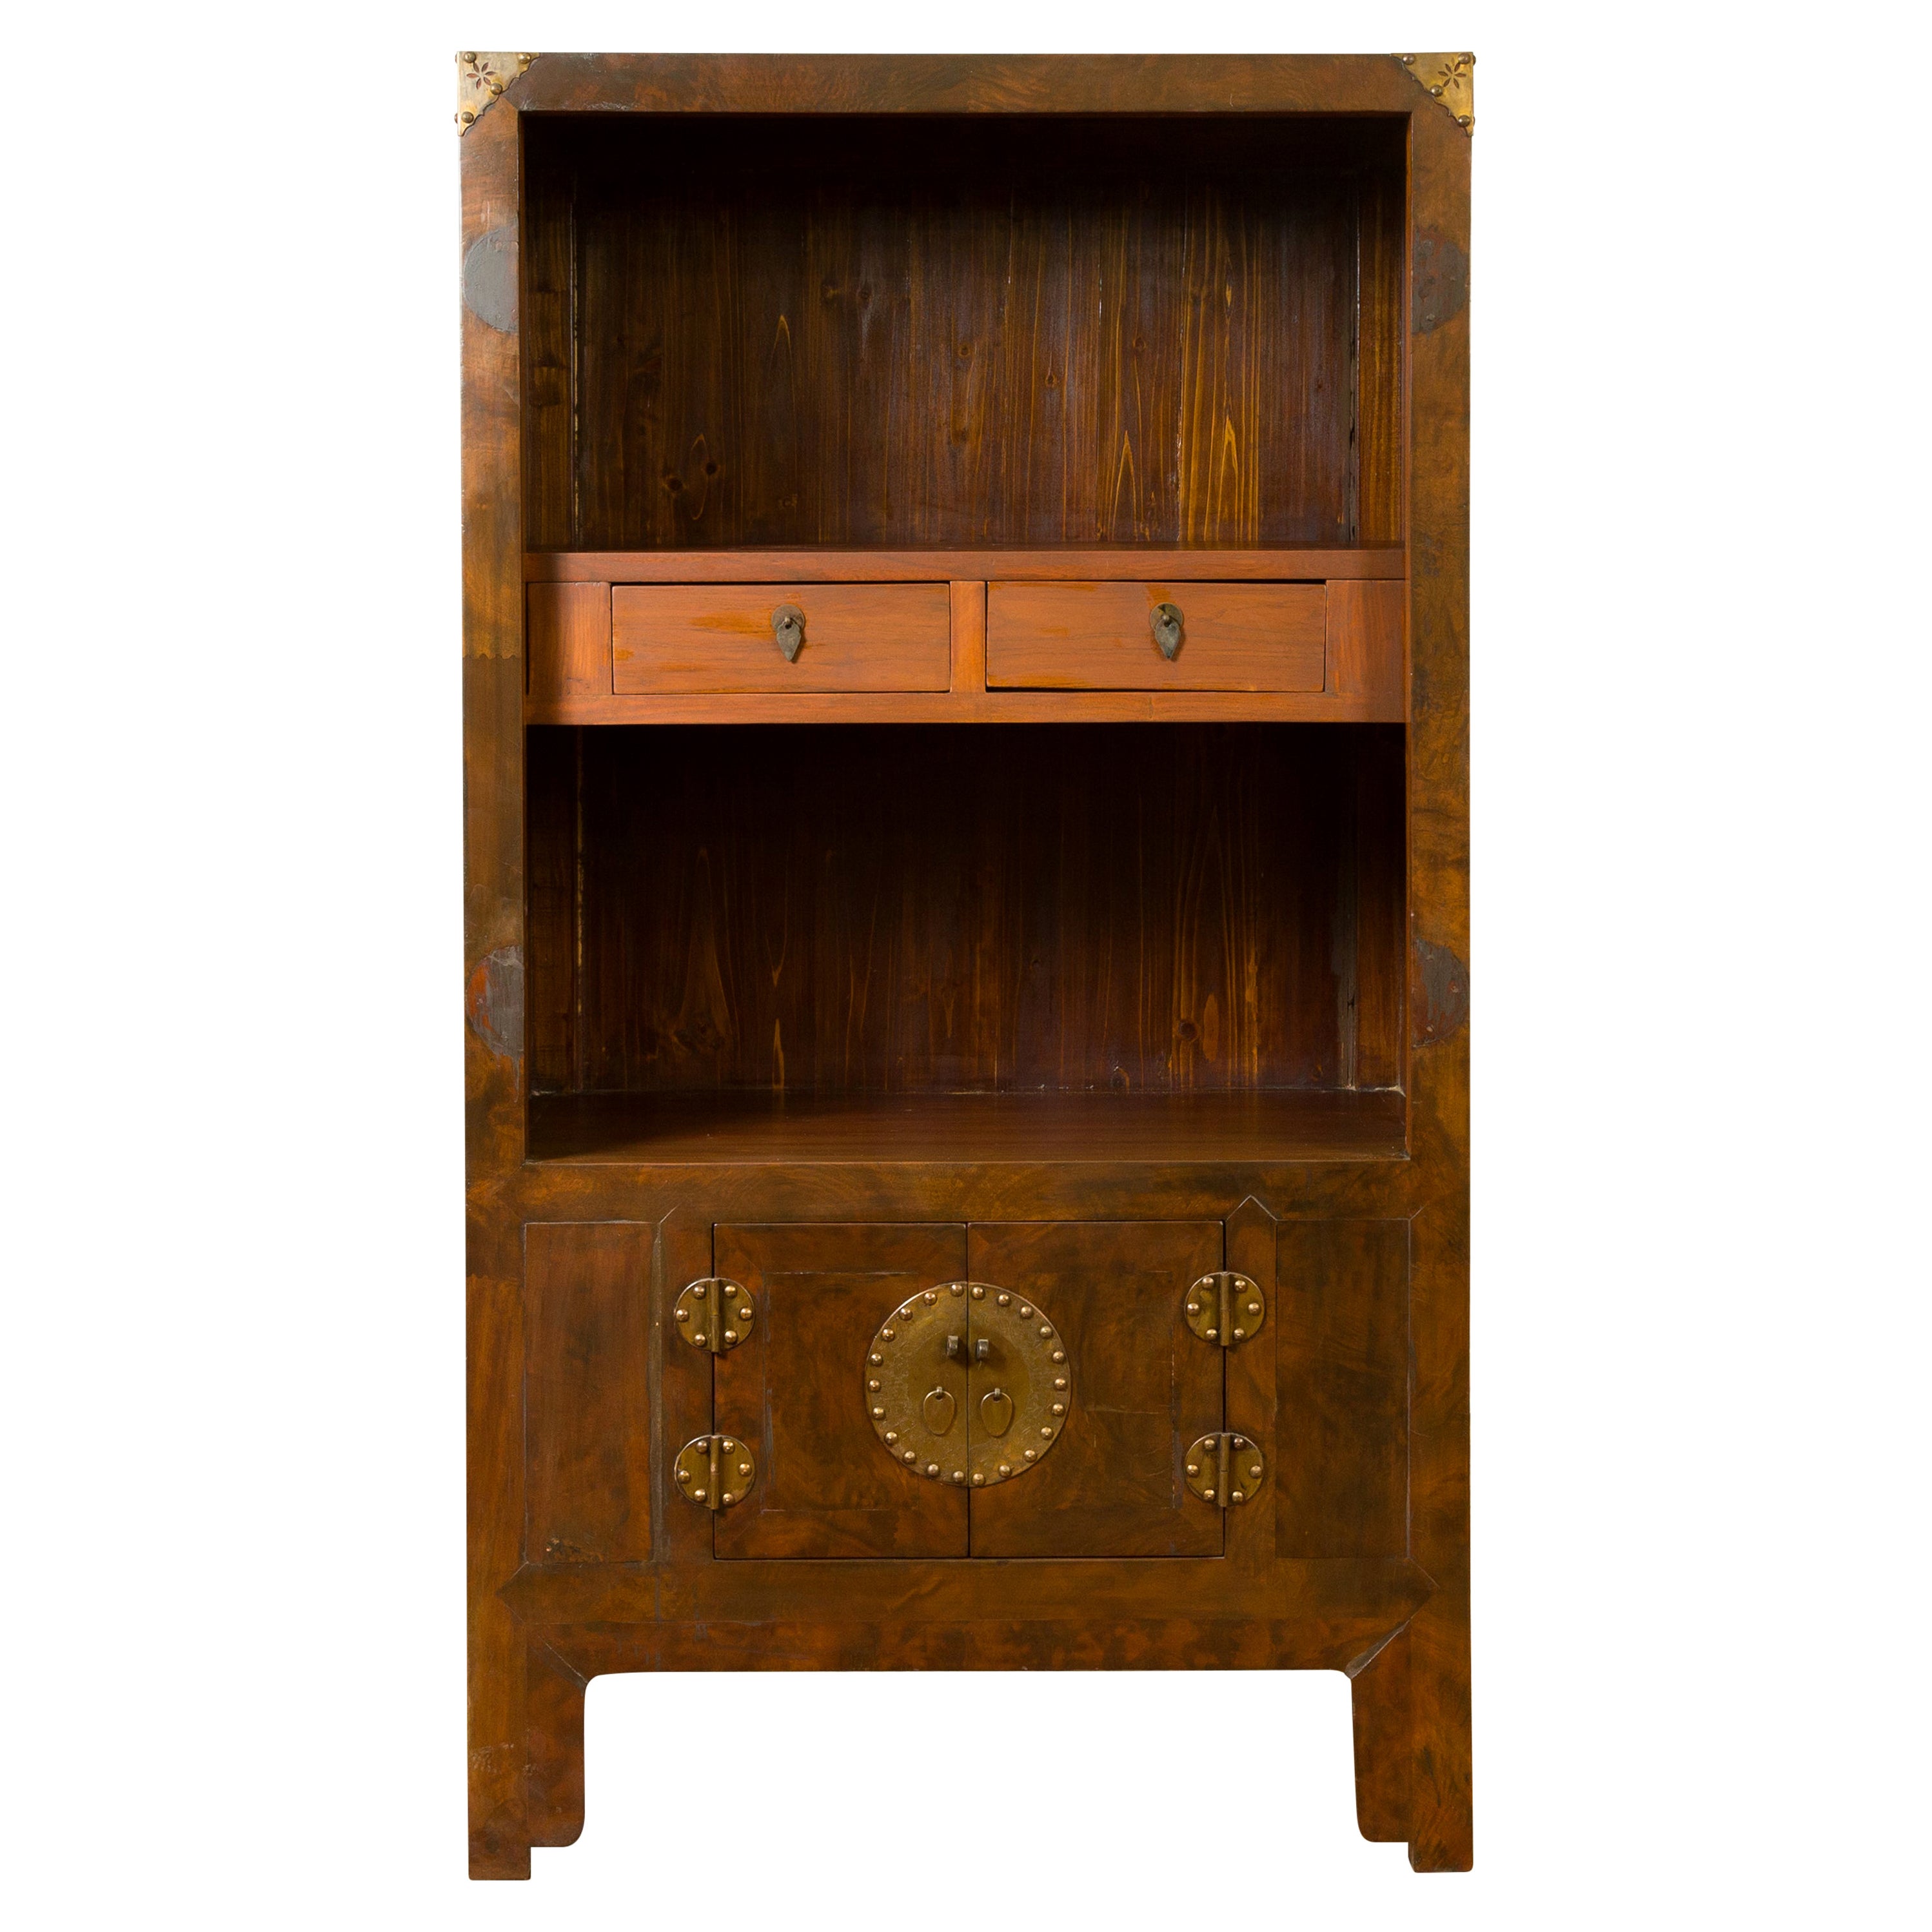 Chinese Bookcases 31 For Sale At 1stdibs